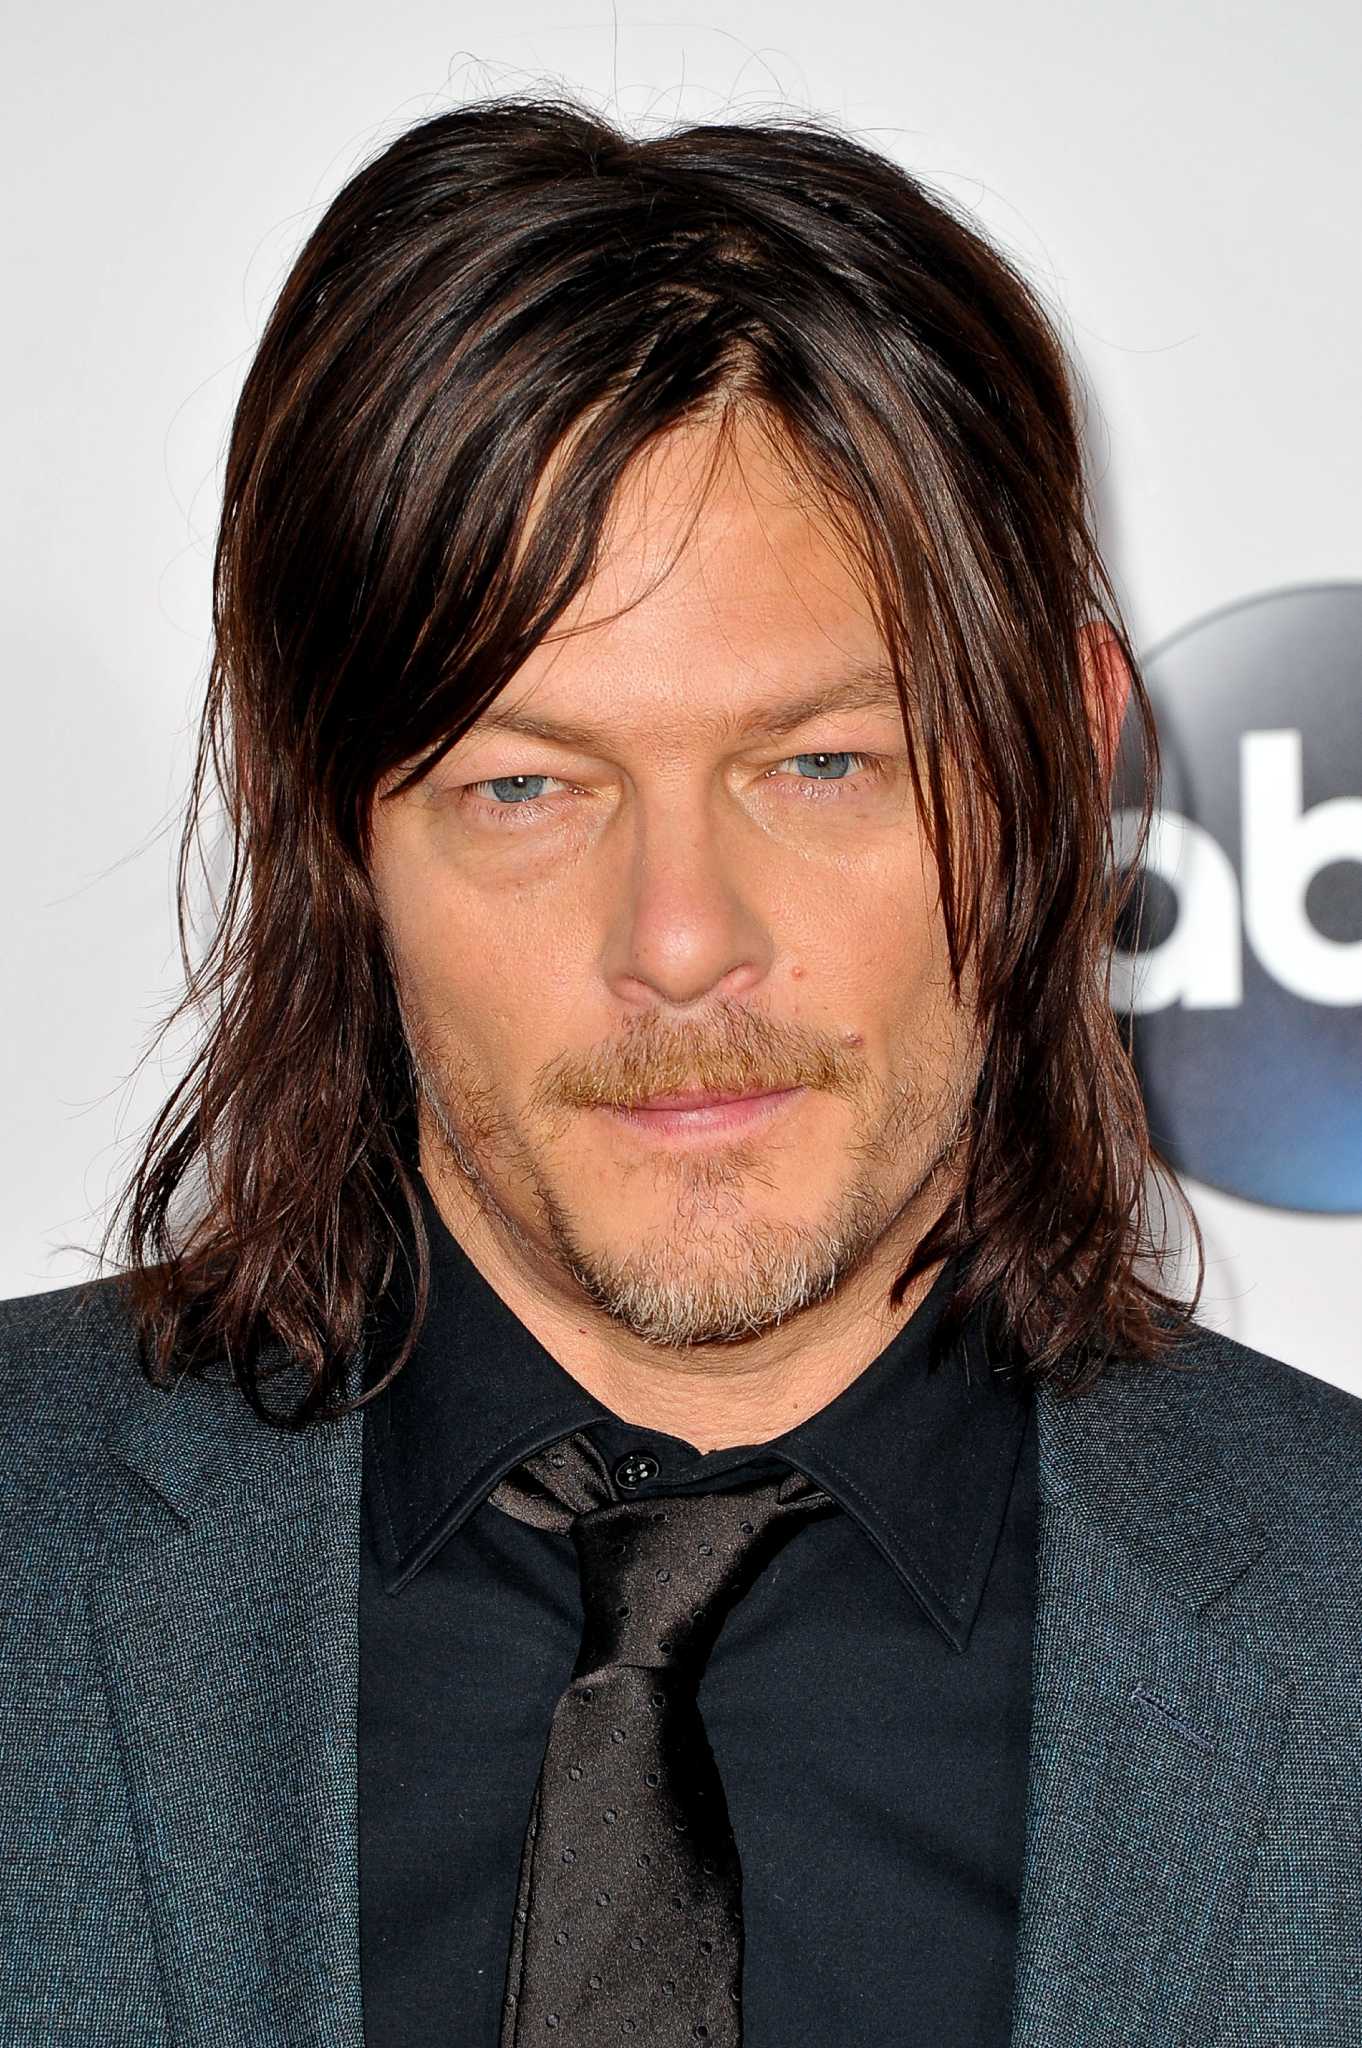 The career of Norman Reedus